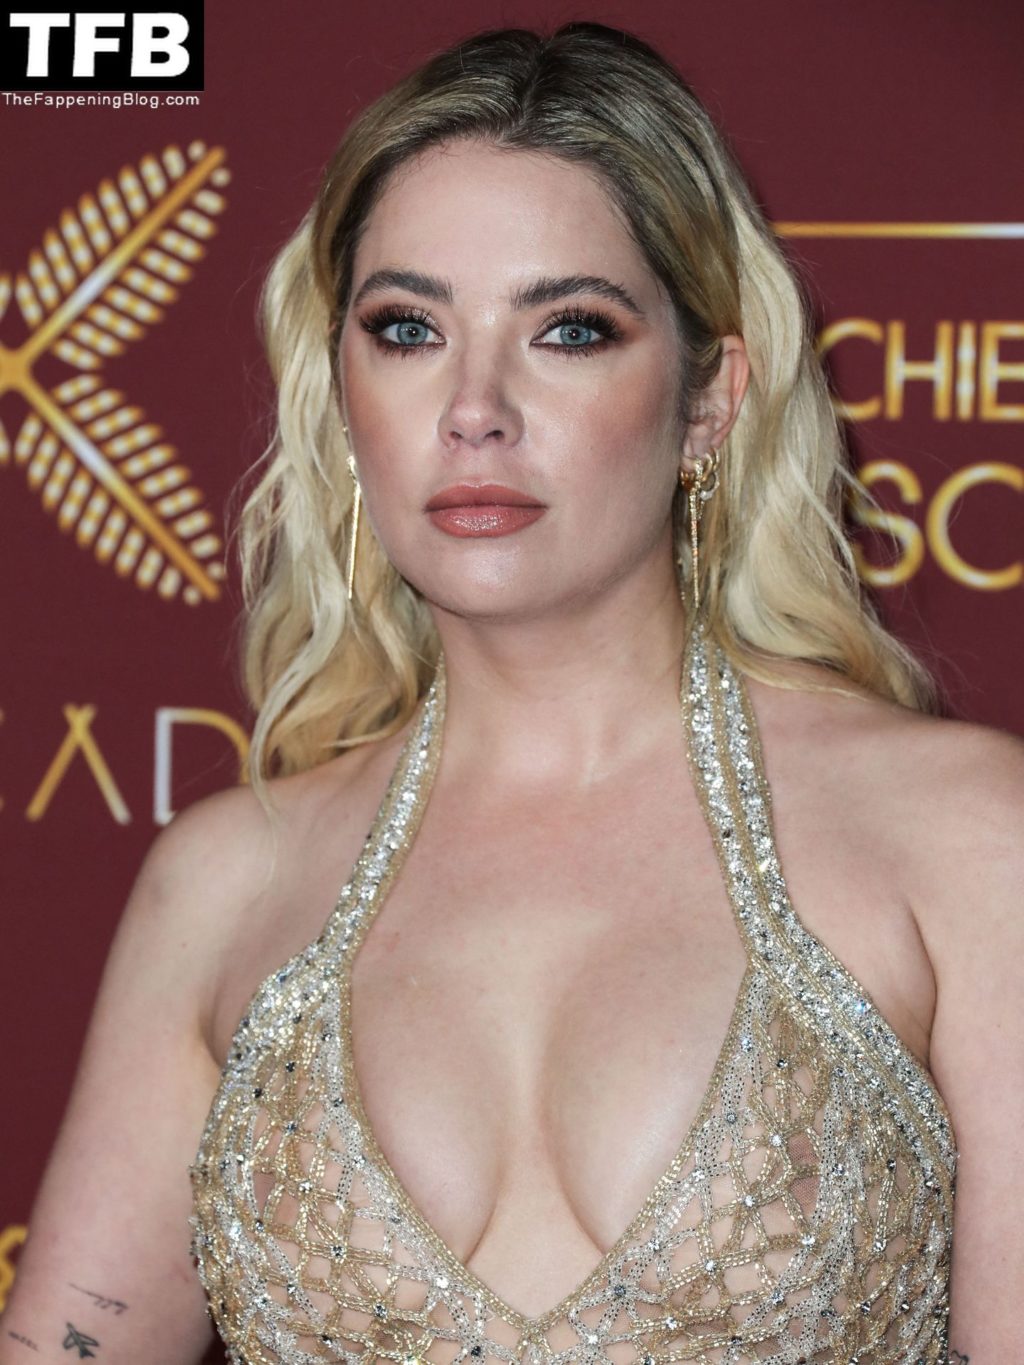 Ashley Benson Displays Nice Cleavage at the Darren Dzienciol and Richie Akiva Oscar Party (22 Photos)